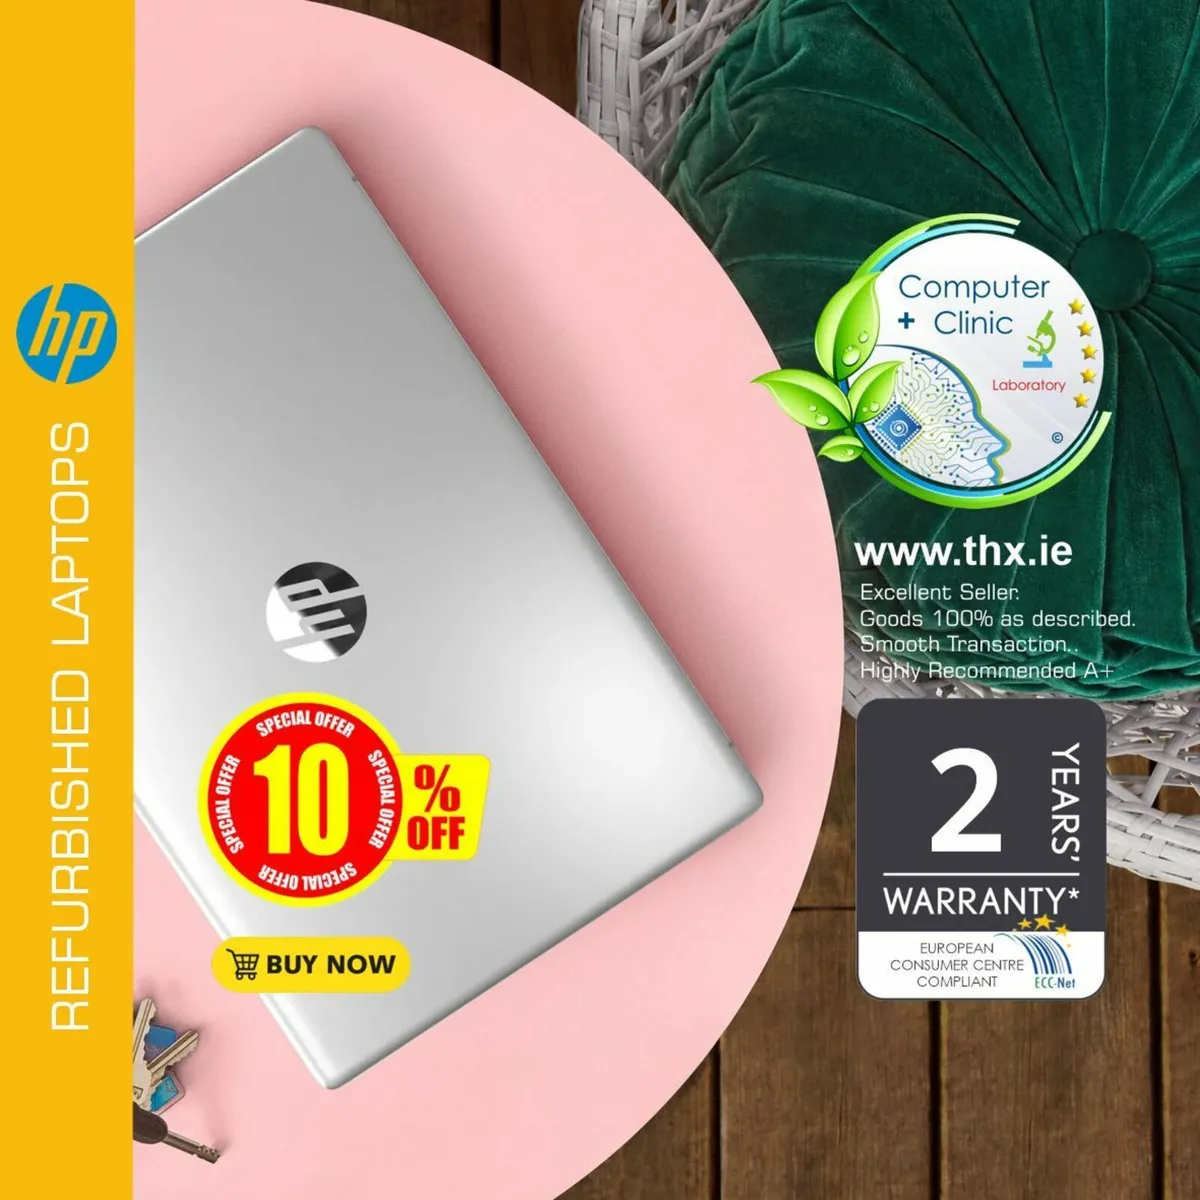 HP LAPTOPS ON SALE》 GET 10% DISCOUNT - Image 1